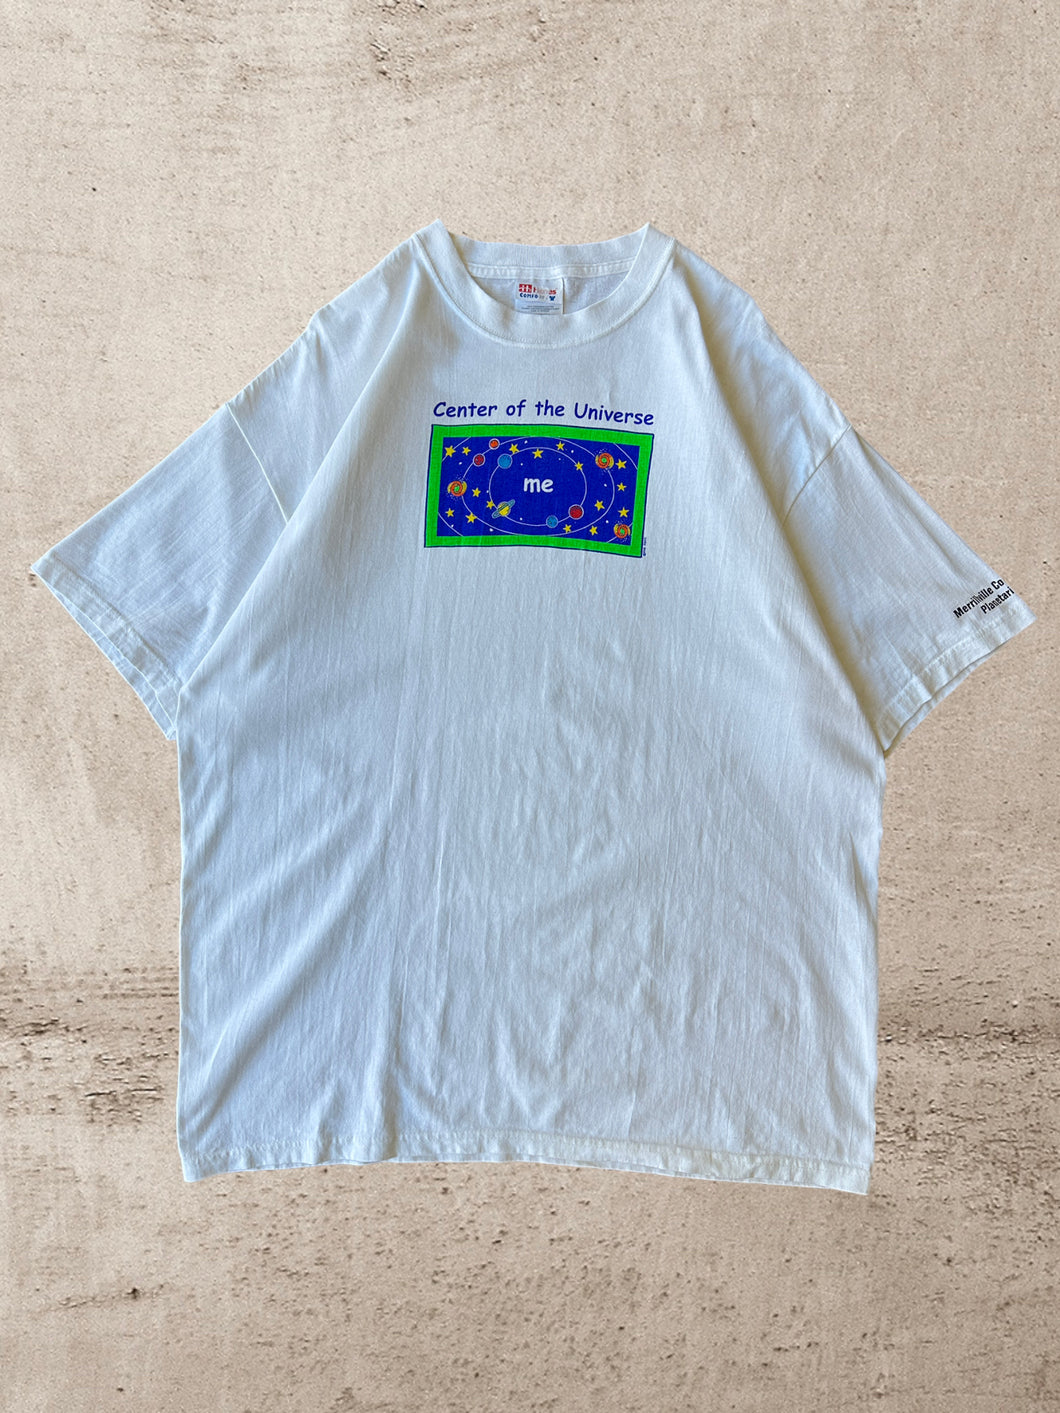 90s Center of The Universe T-Shirt - XL